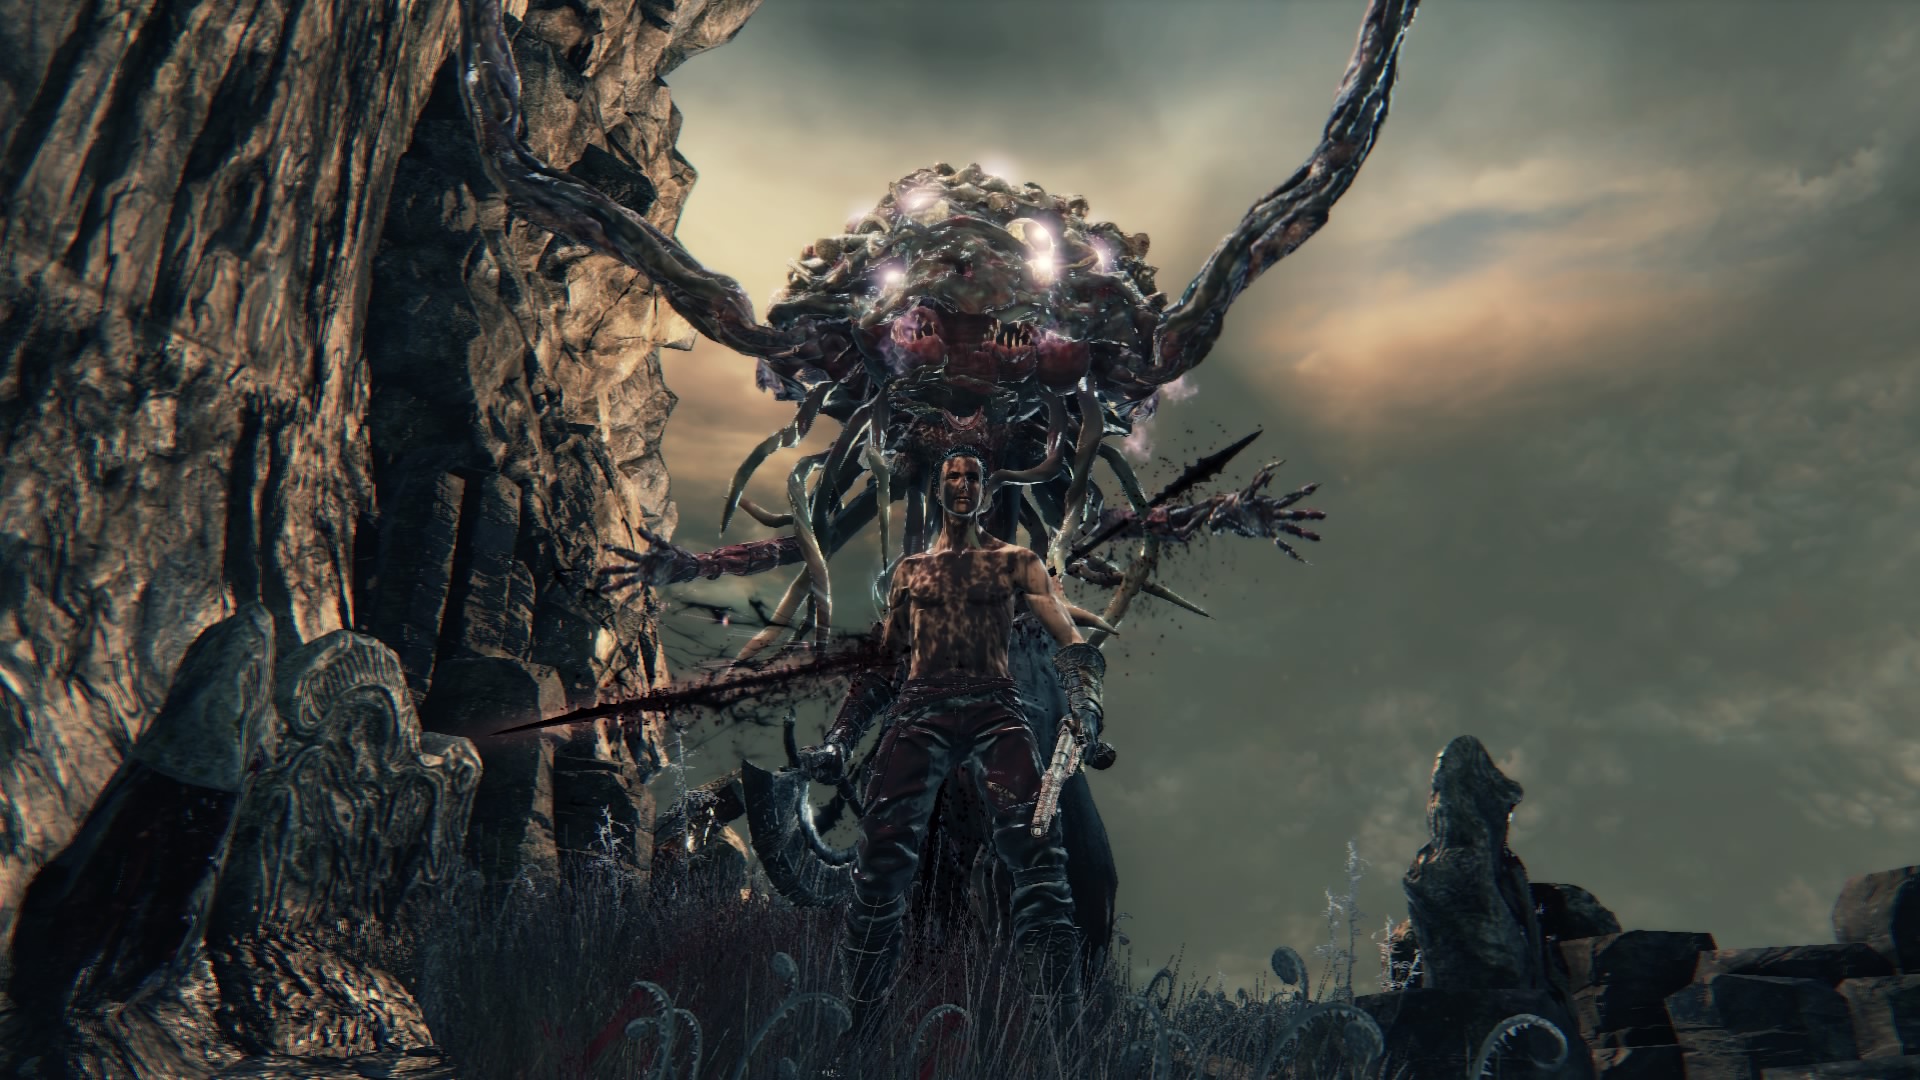 bloodborne enemies with giant brains that frenzy